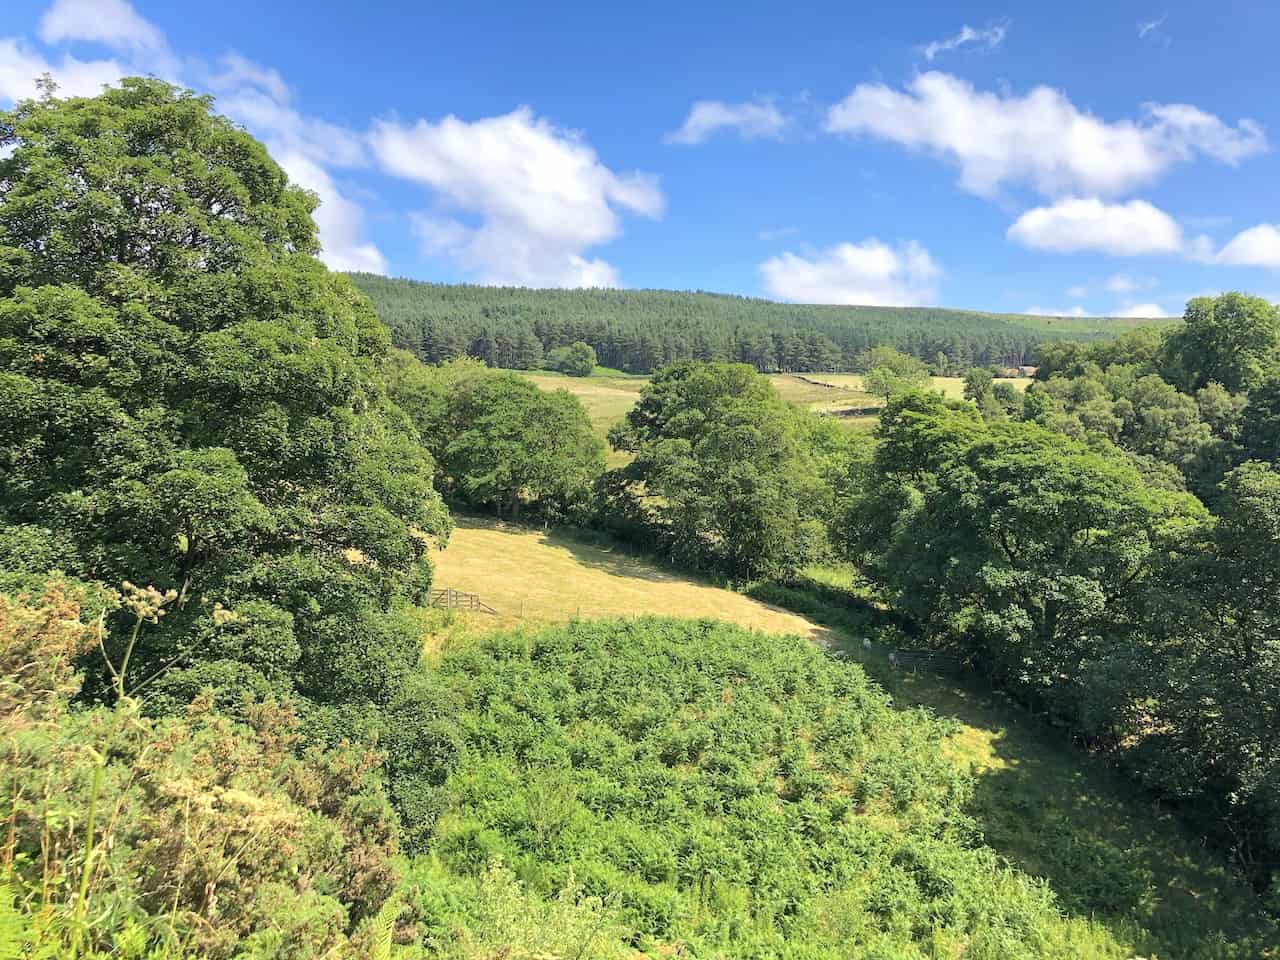 Near Bilsdale Hall, Seave Green, the scenery is simply stunning, making it a perfect spot to pause and appreciate the serene beauty of the area during your Wainstones walk.